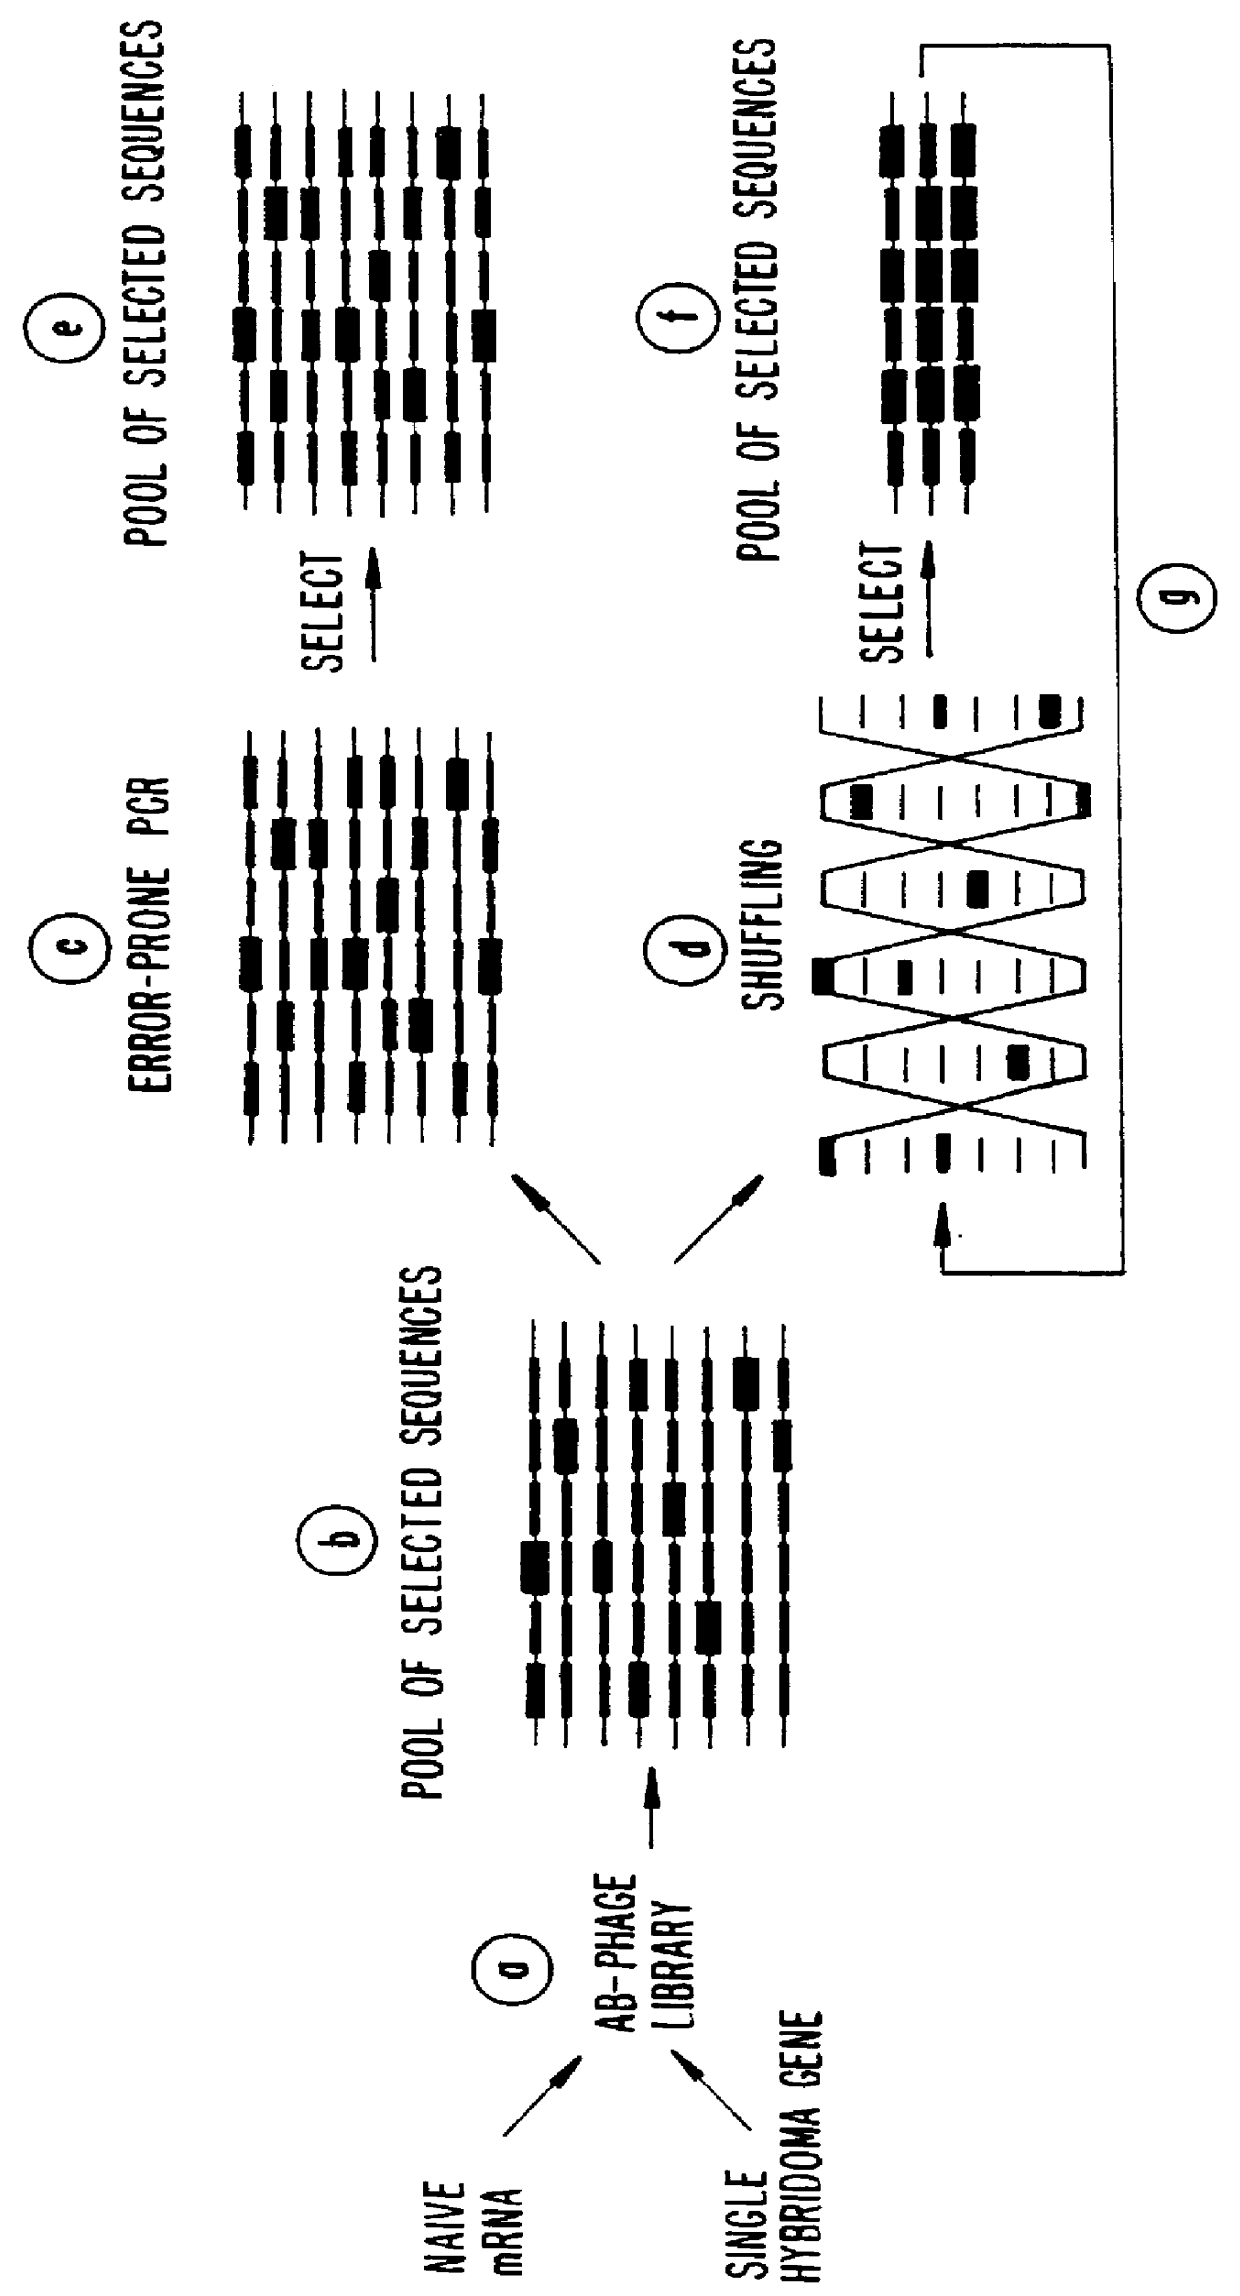 Methods for generating polynucleotides having desired characteristics by iterative selection and recombination